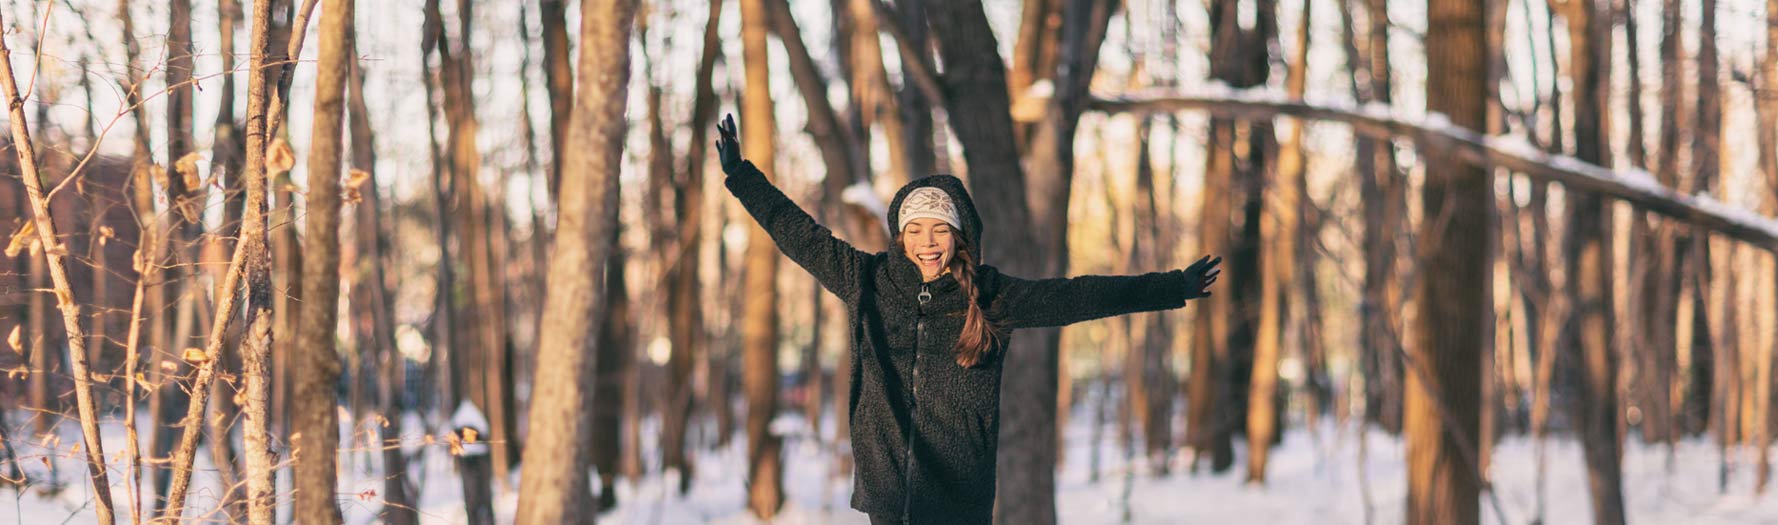 woman smiling walking in winter forest